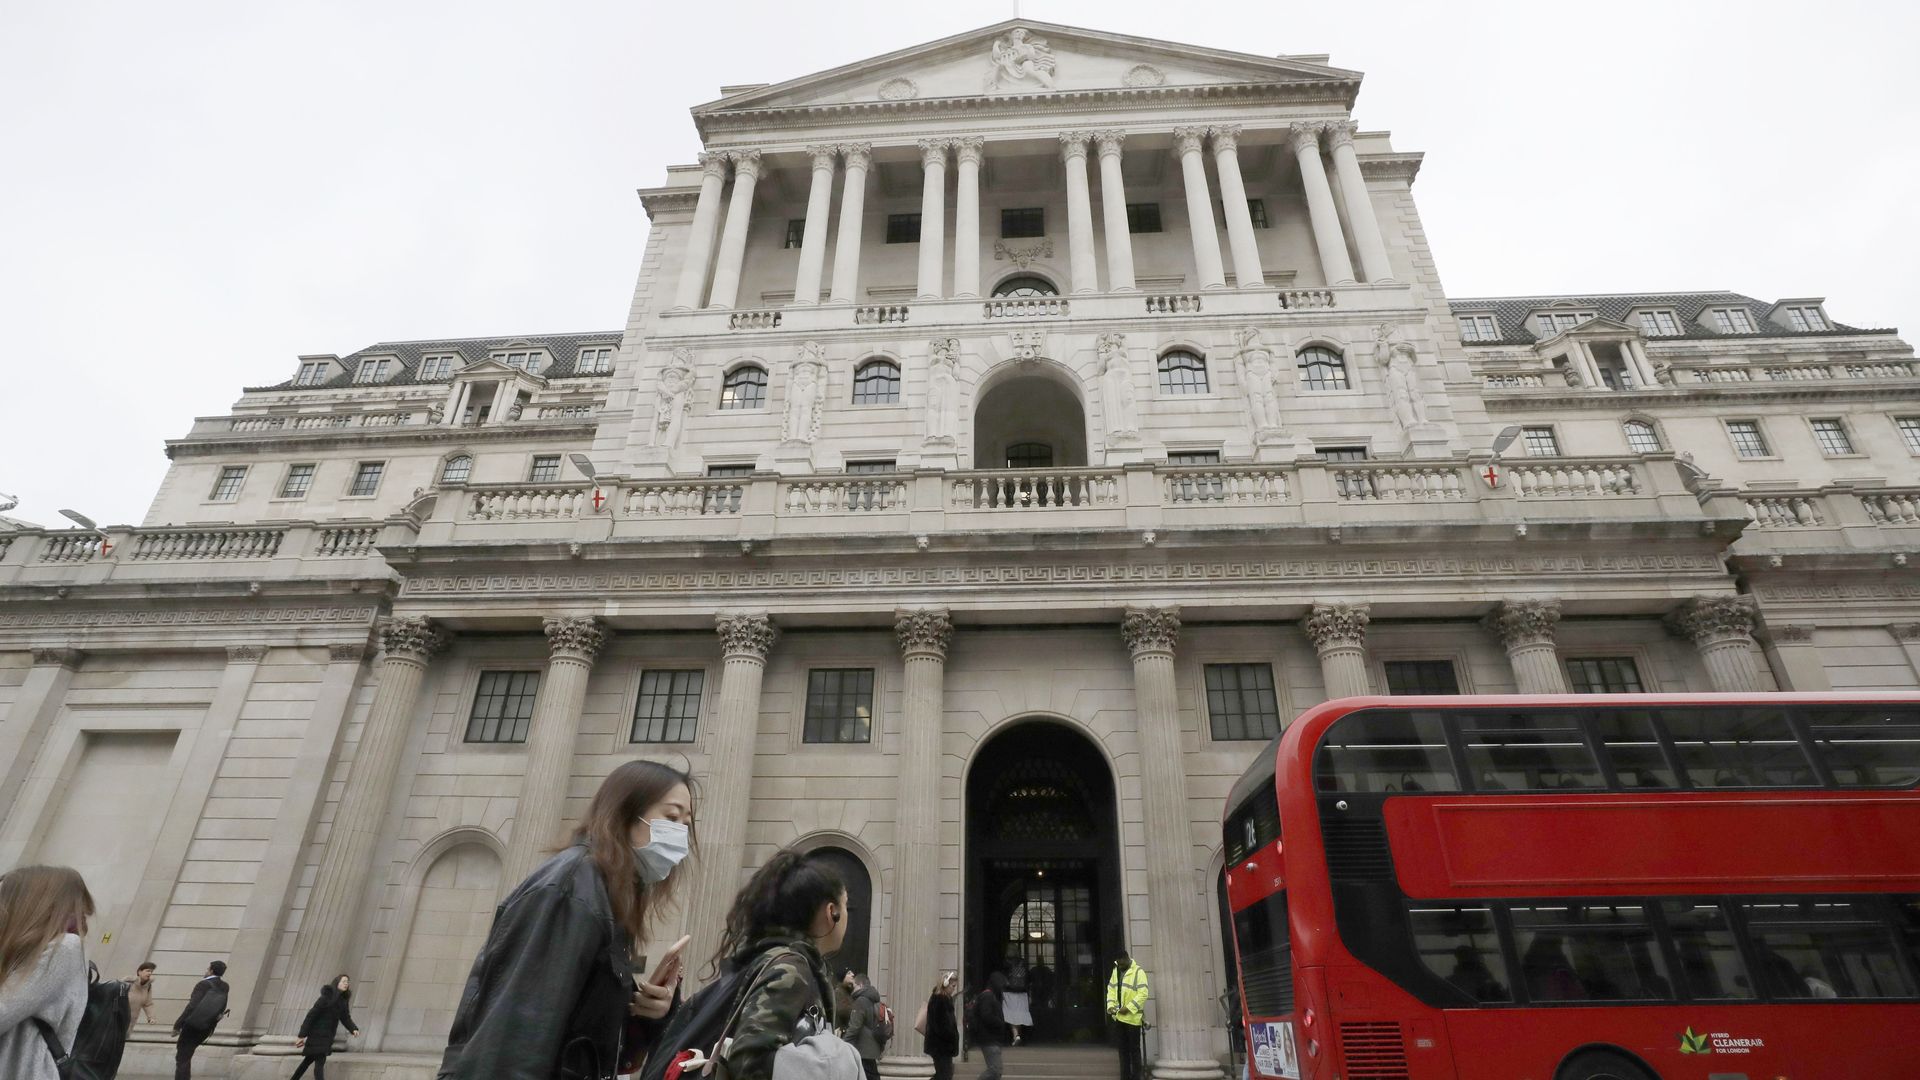 In this image, two women walk past the Bank of England in London